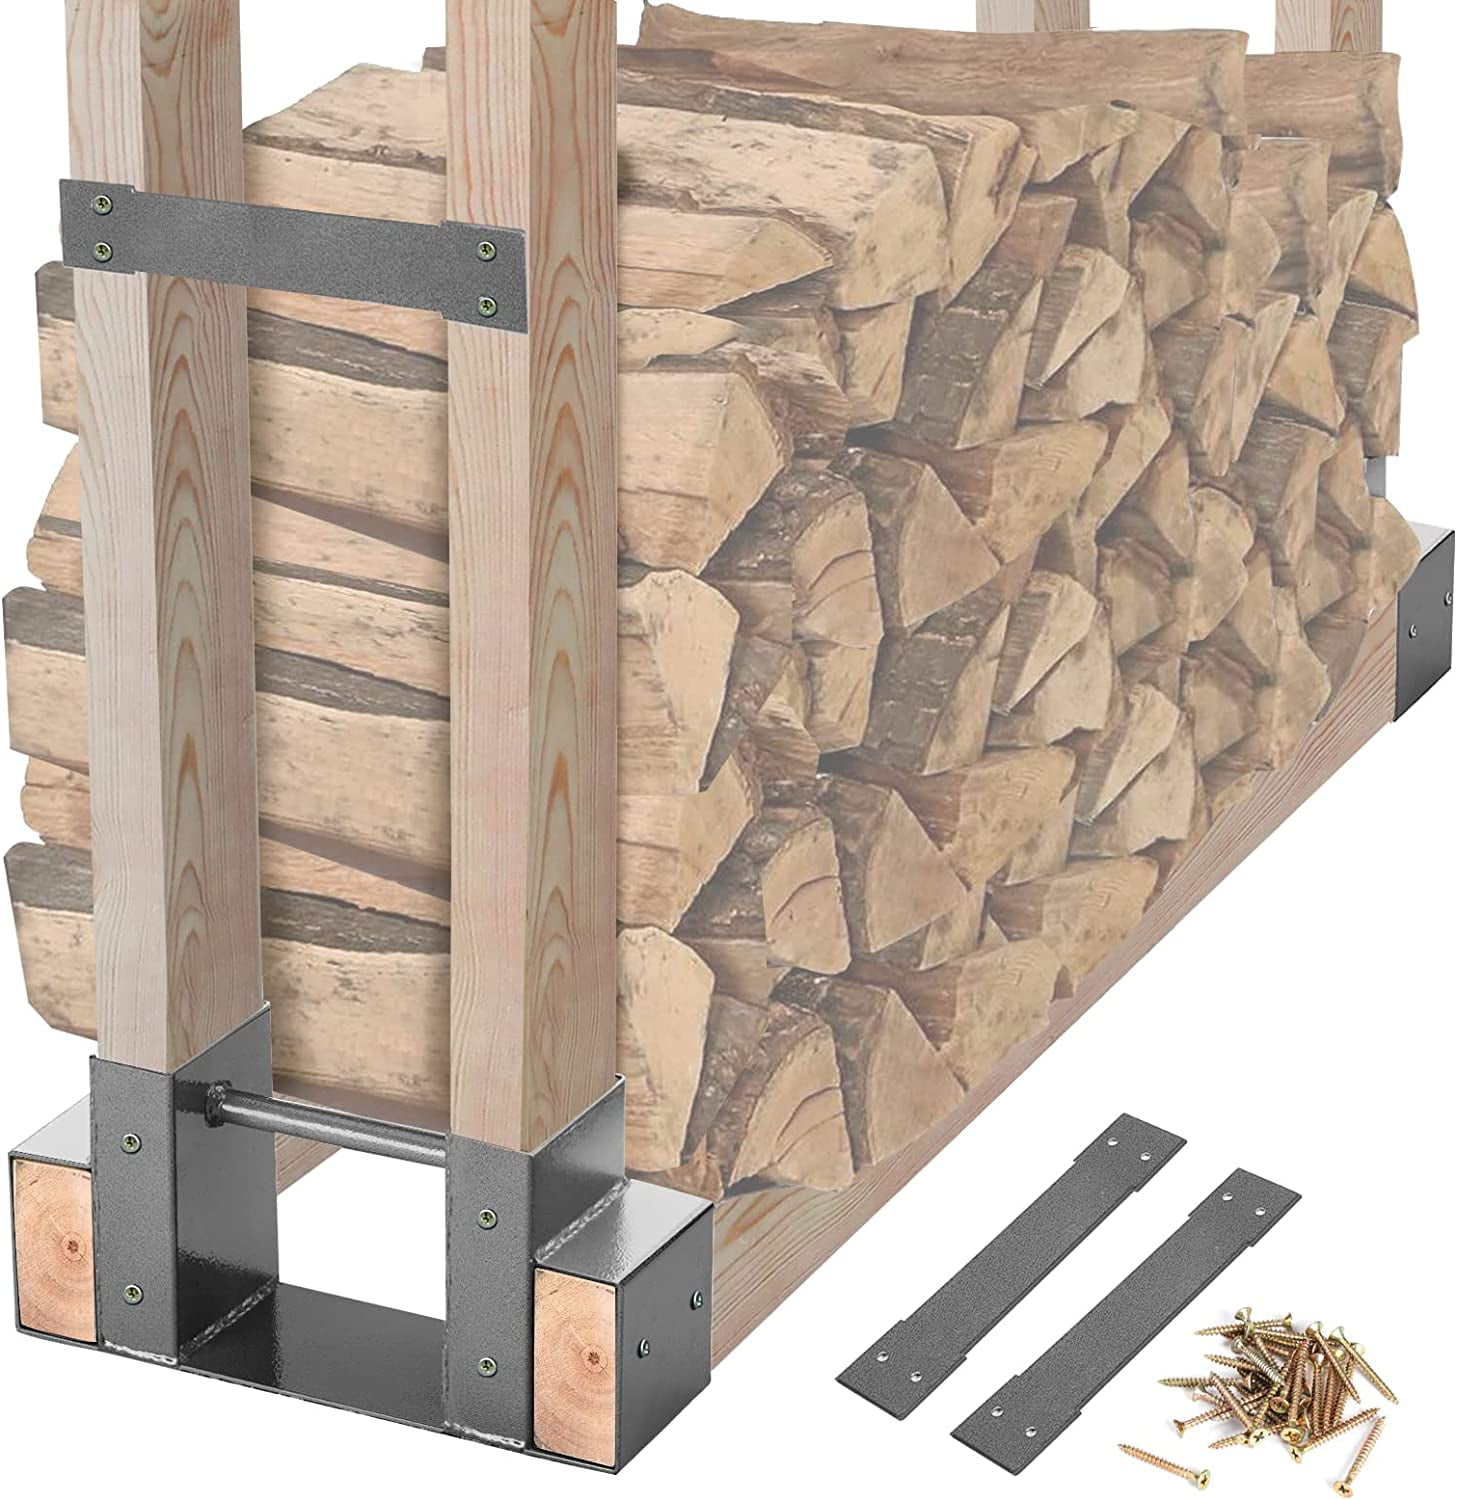  MOFEEZ Outdoor Firewood Log Storage Rack 2x4 Bracket Kit,  Fireplace Wood Storage Holder, Adjustable to Any Length - Silver Black, Two  Bases : Patio, Lawn & Garden